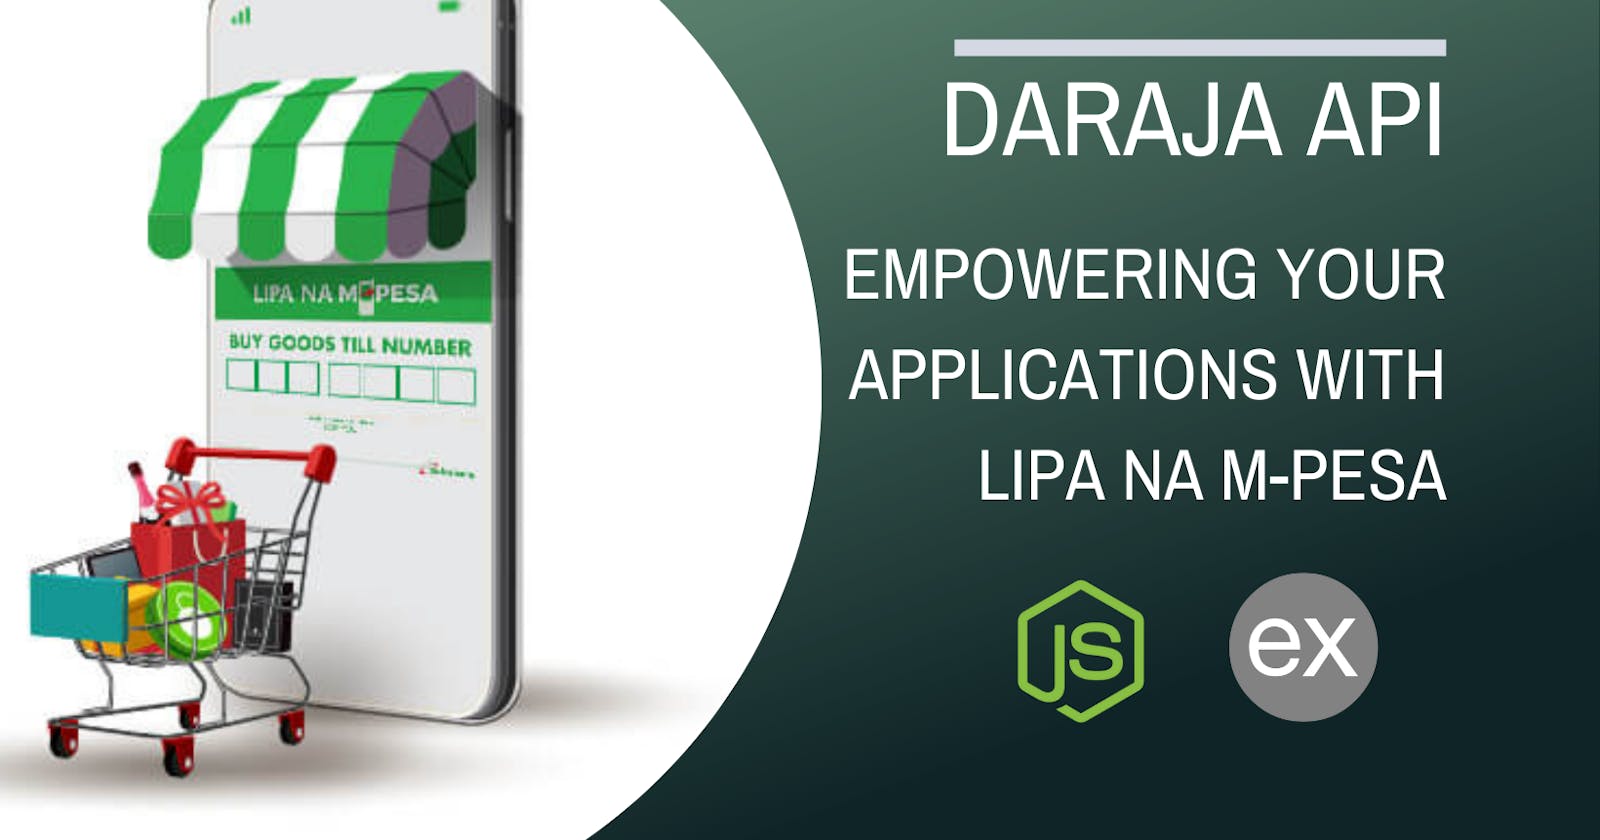 Empowering Your Applications with Lipa na M-Pesa: Leveraging Express, Node.js and the Daraja API